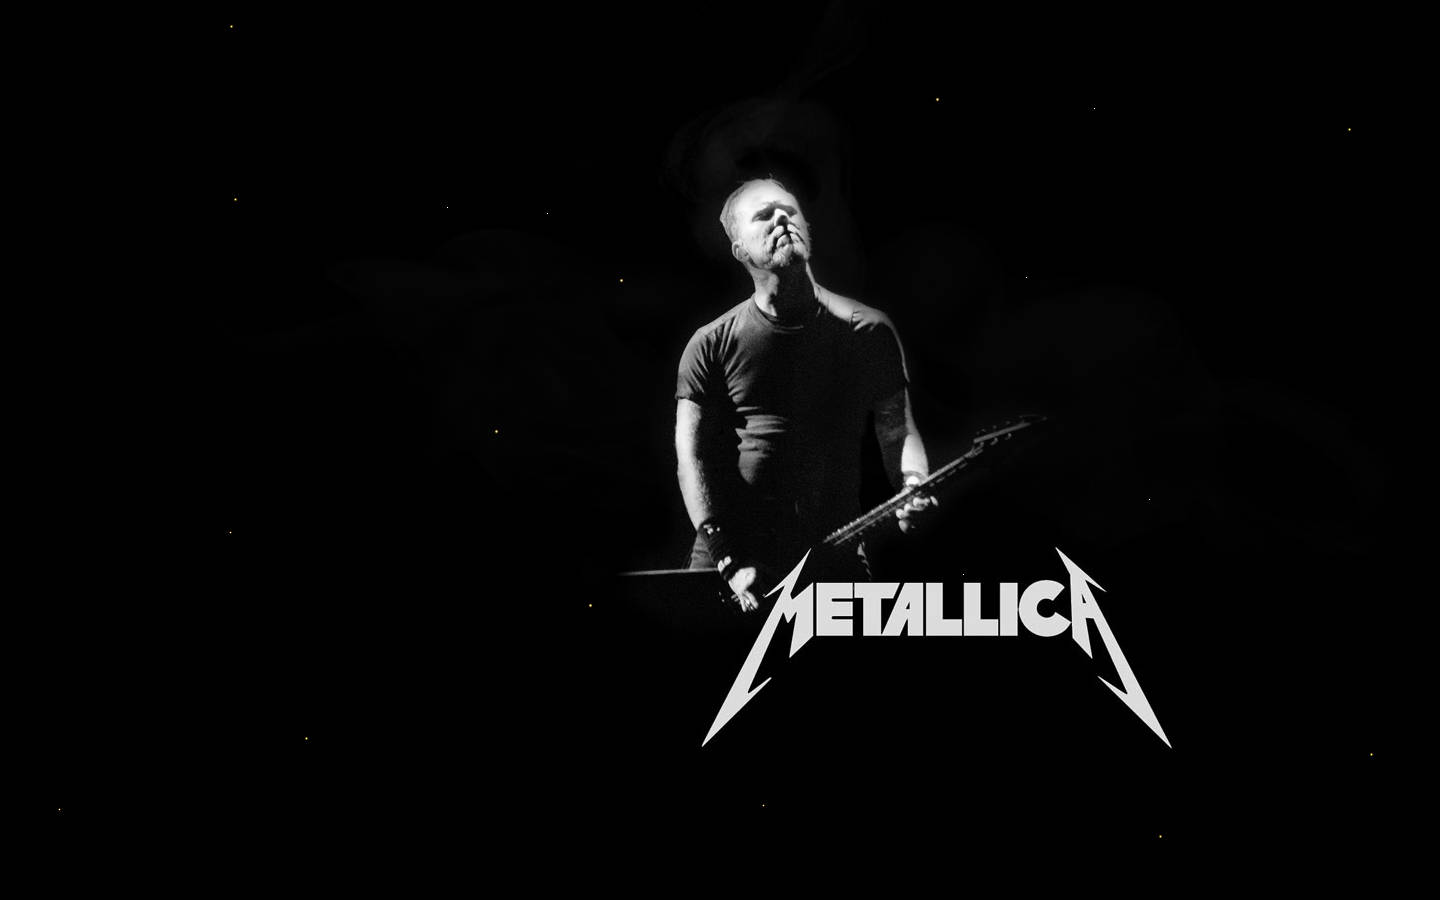 James Hetfield takes the stage with Metallica Wallpaper